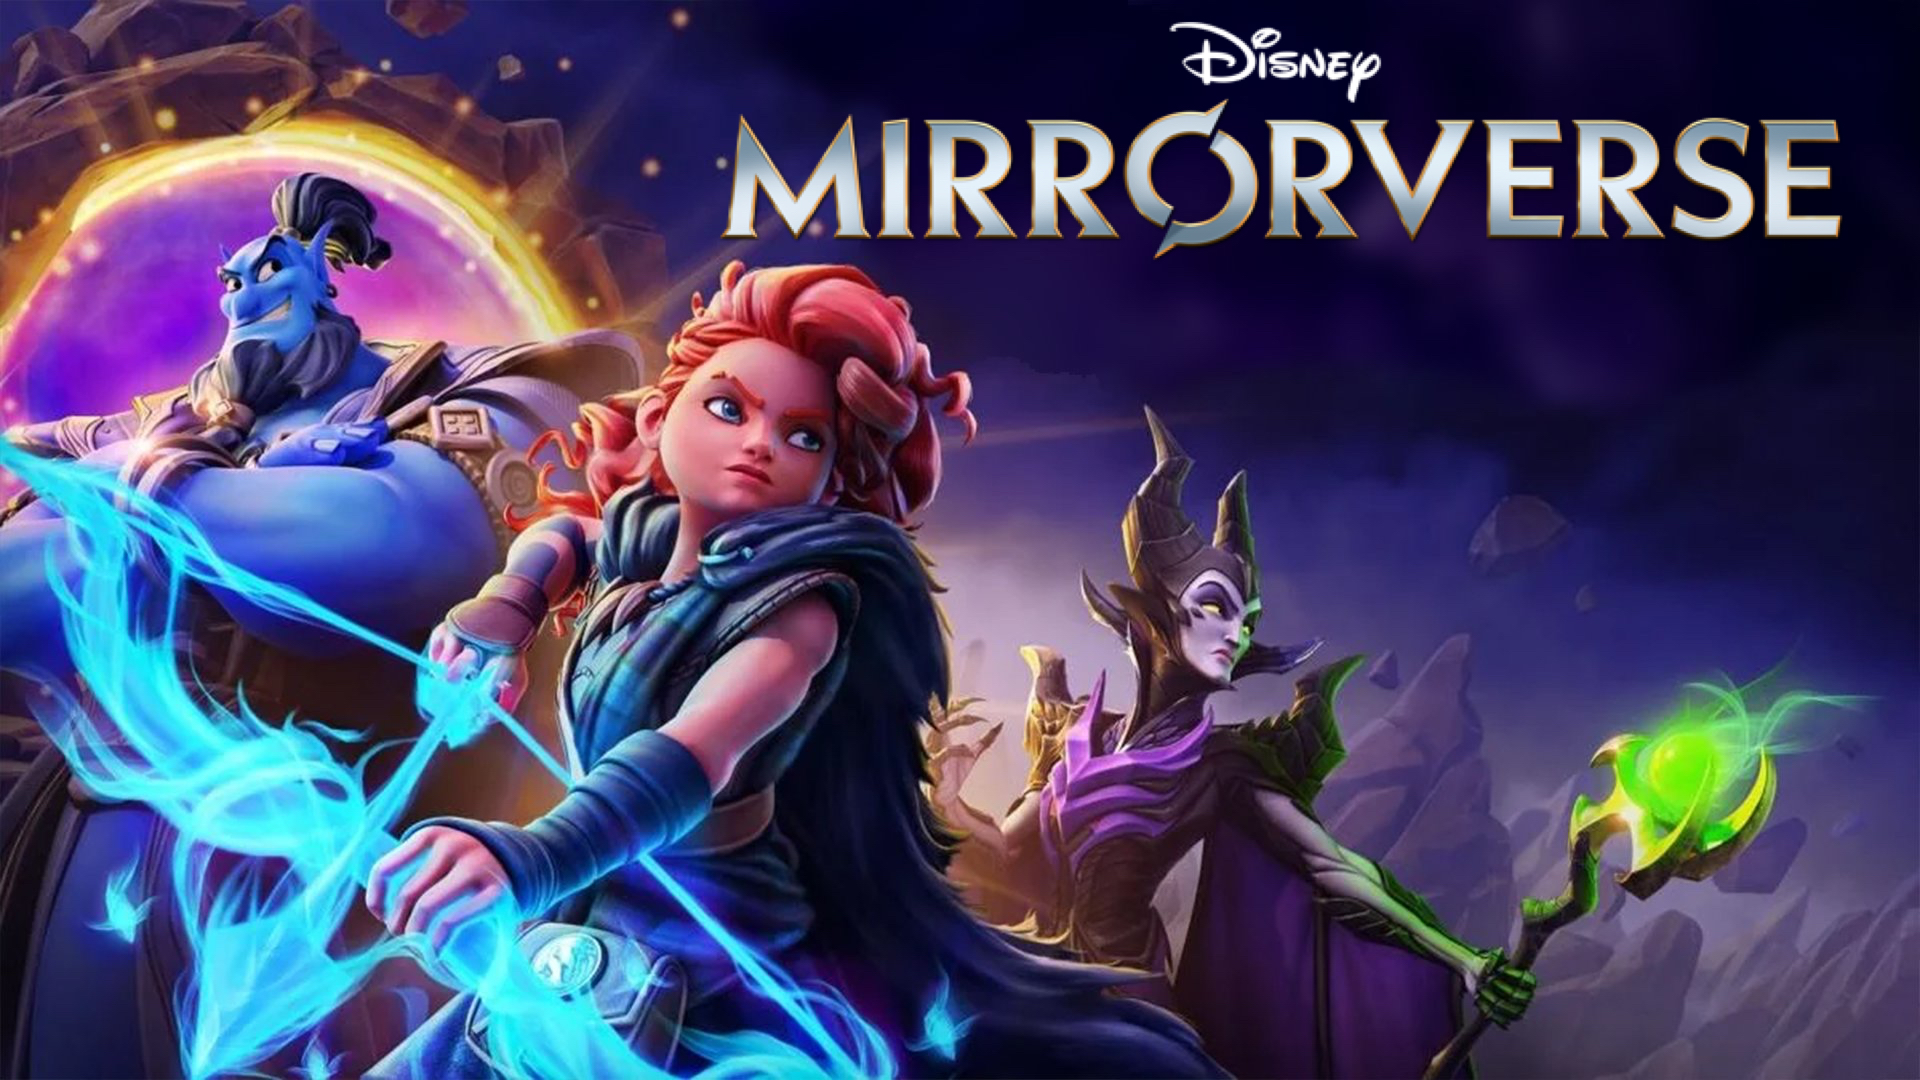 New Promotional Images For ‘Disney Mirrorverse’ Mobile Game Revealed